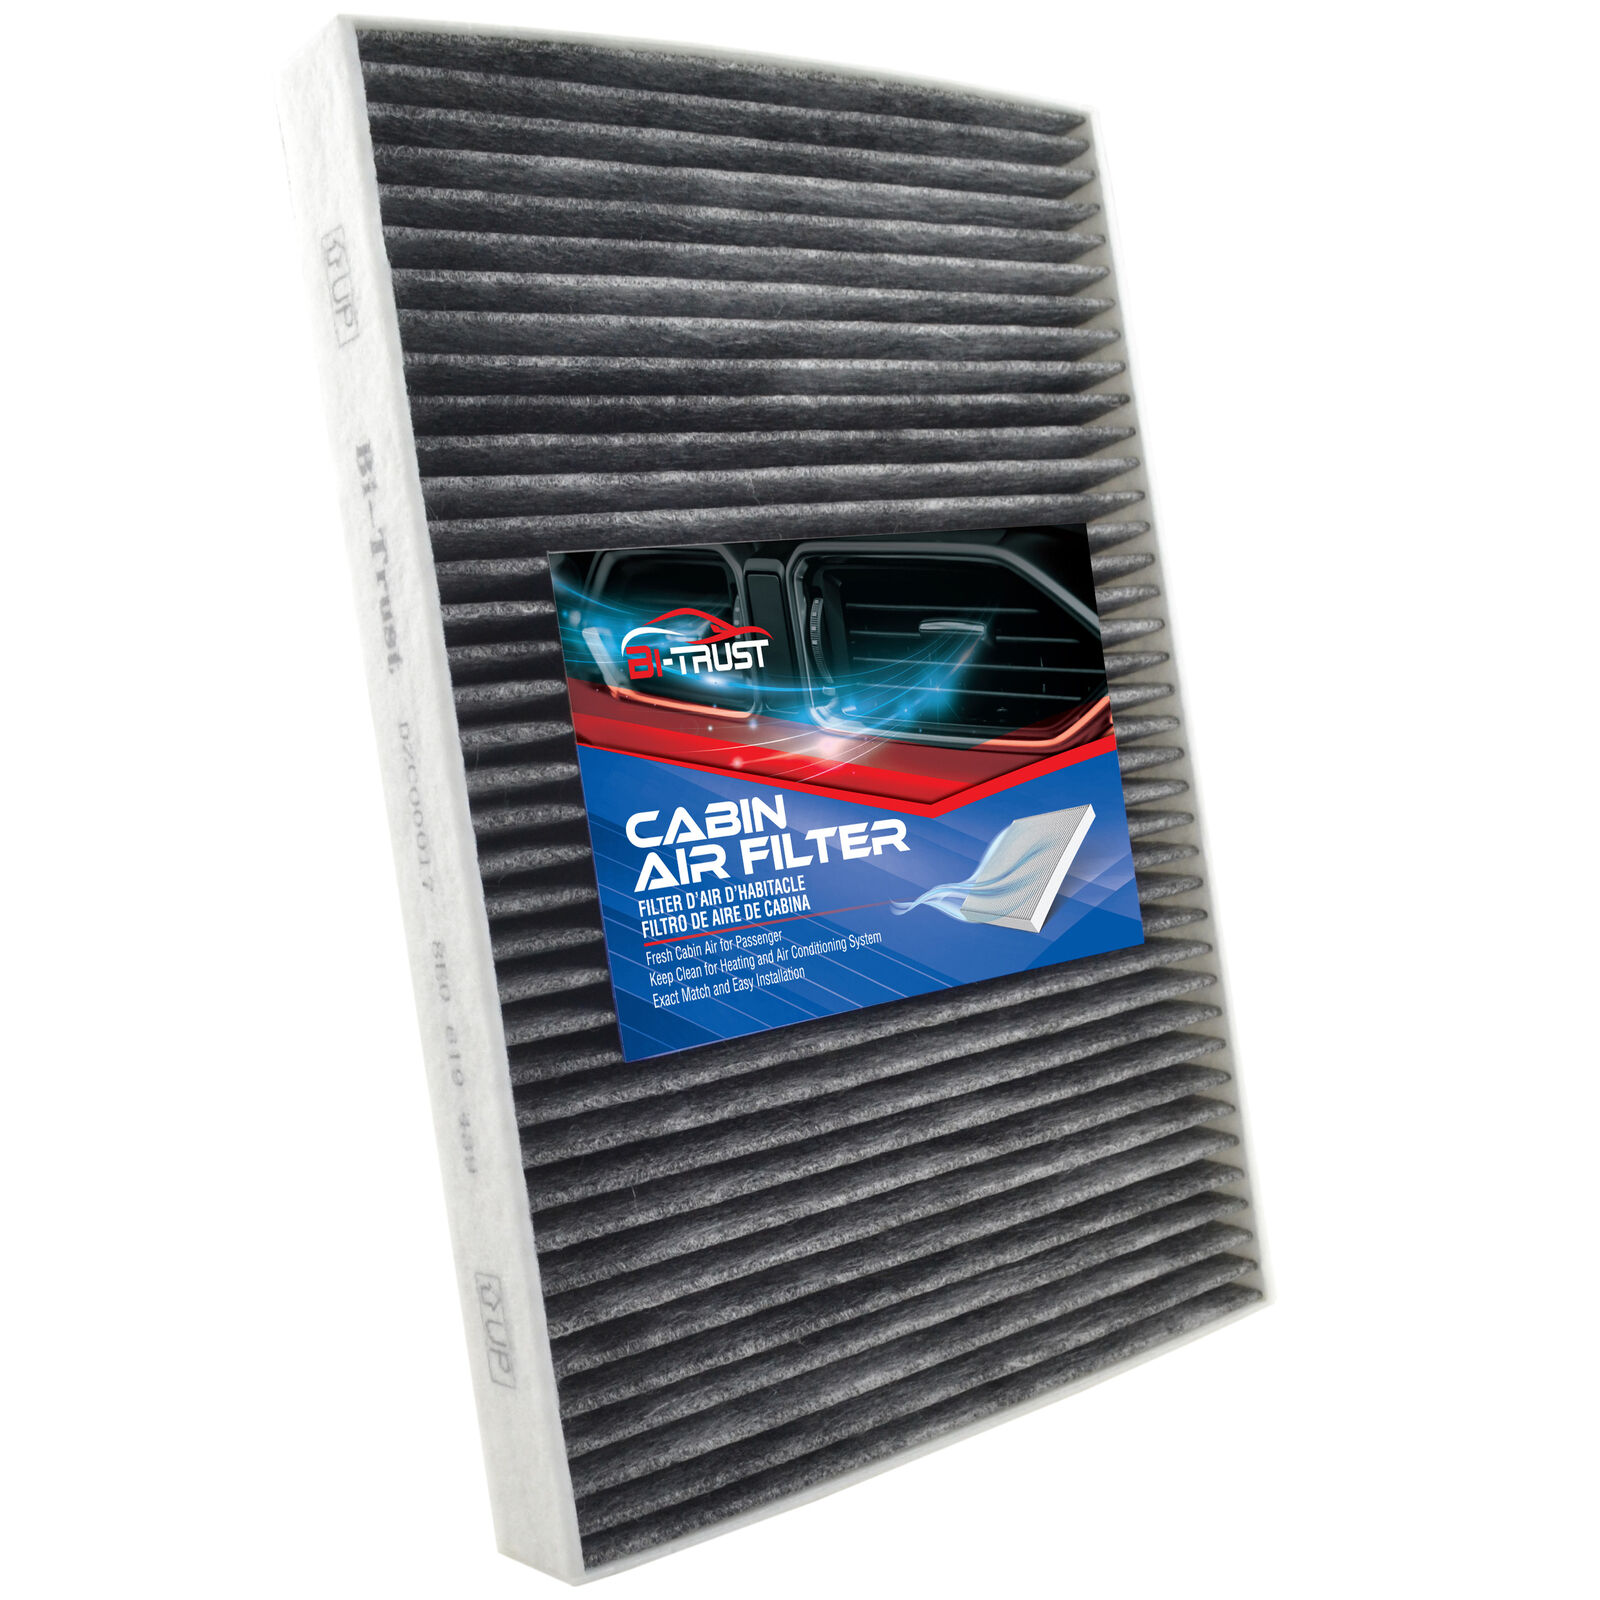 Cabin Air Filter for Audi A4 A6 S4 S6 Allroad Quattro RS4 RS6 S4 S6 A4 Quattro